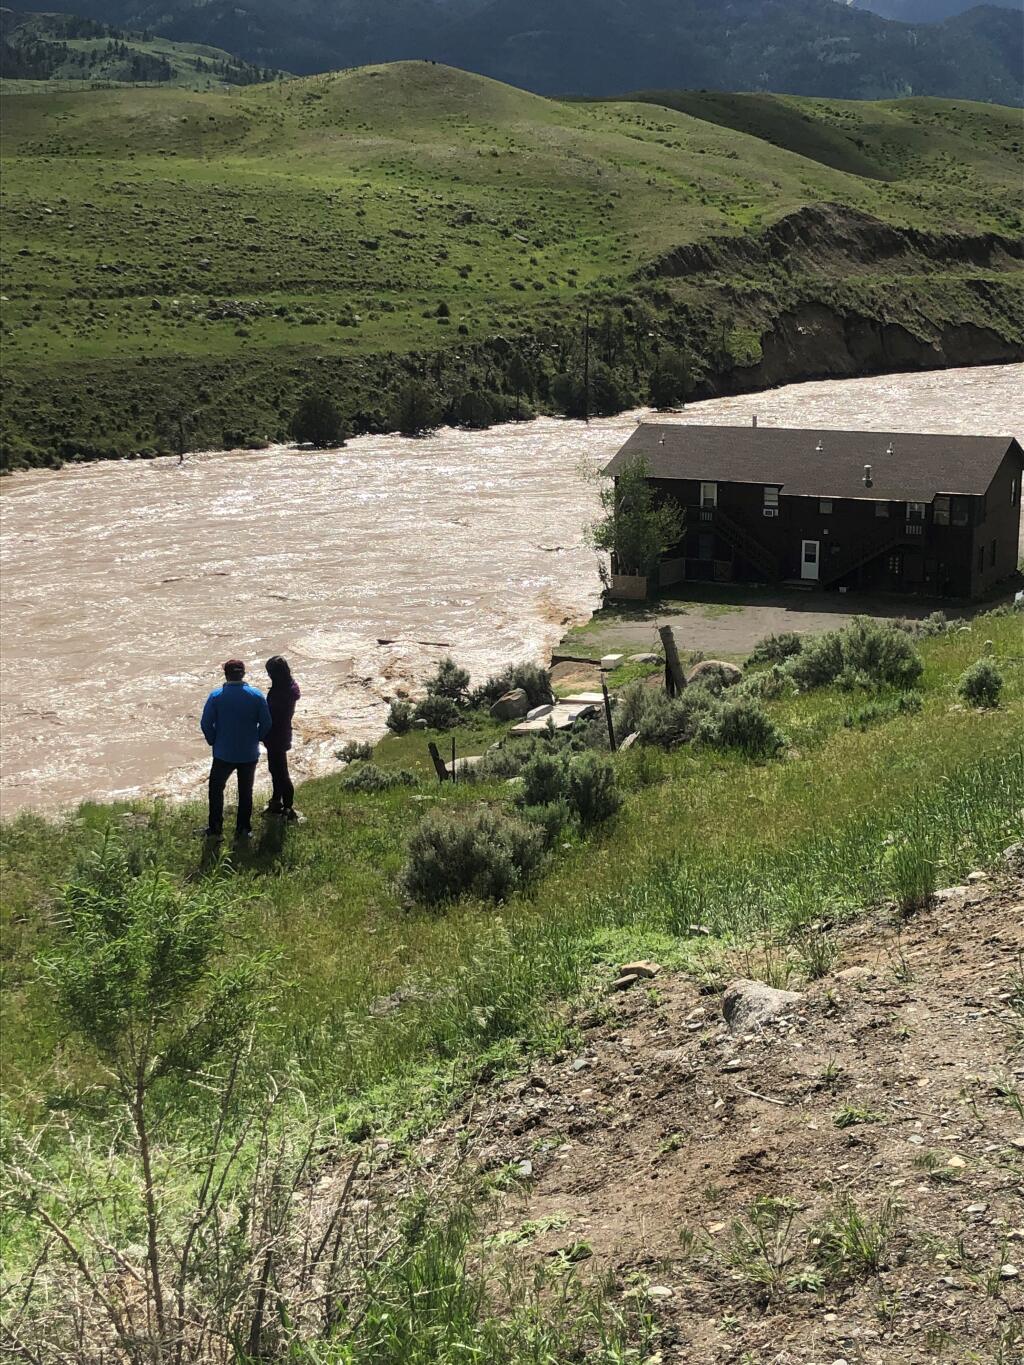 National Park Service house begins sinking into Yellowstone River on June 13. (Photo courtesy of Tate Birnie)